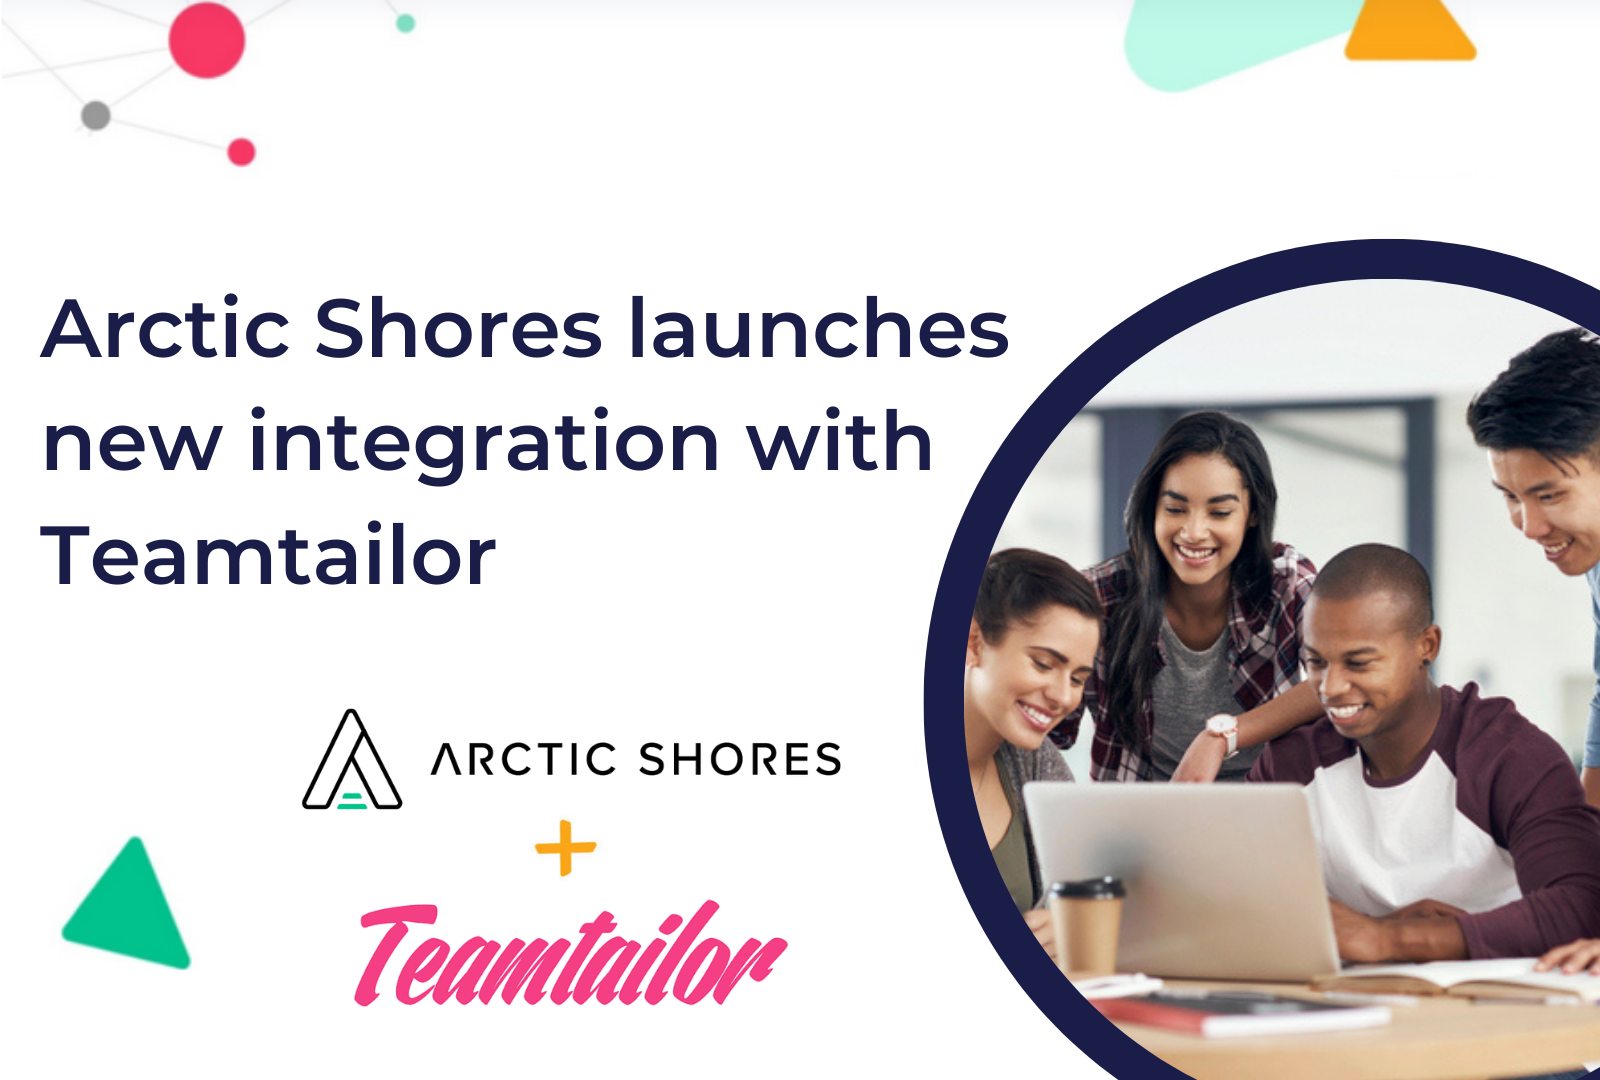 Arctic Shores launches new integration with Teamtailor